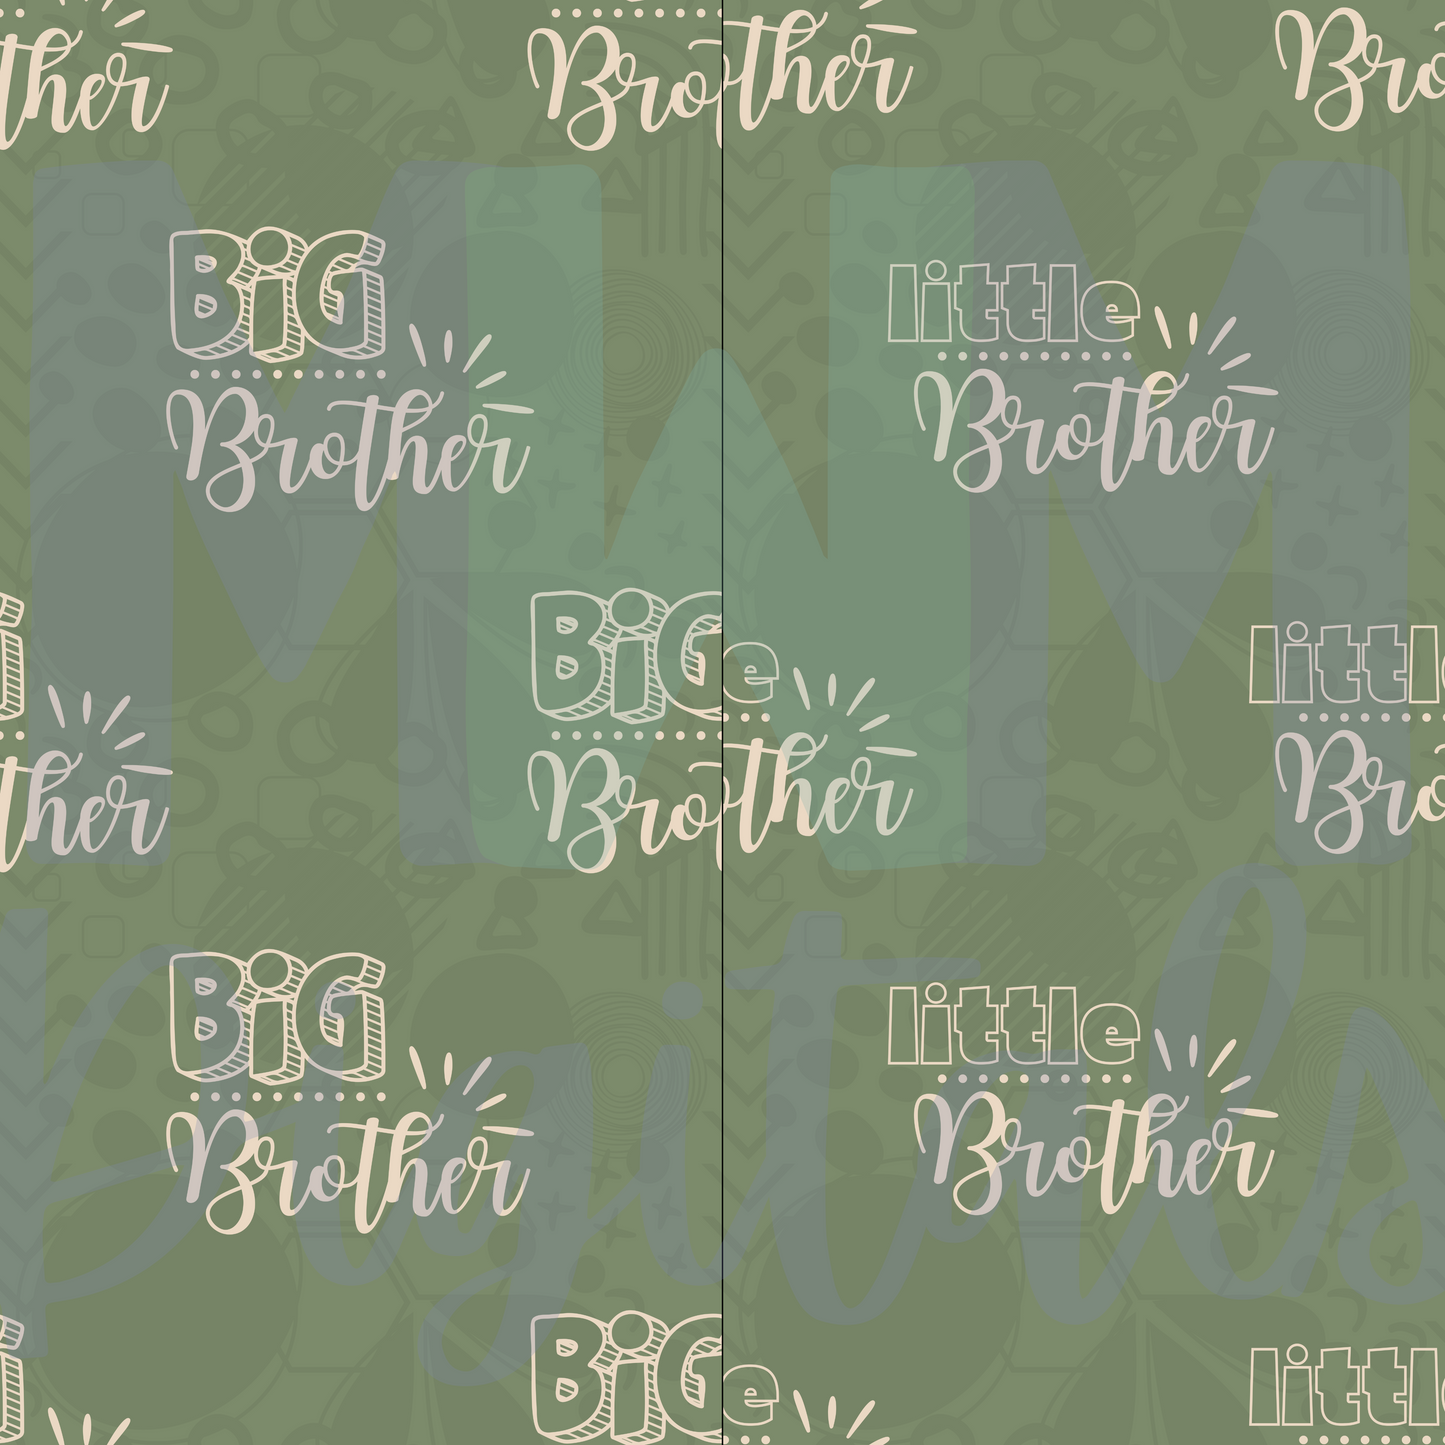 Big & Little Brother/Sister Seamless File